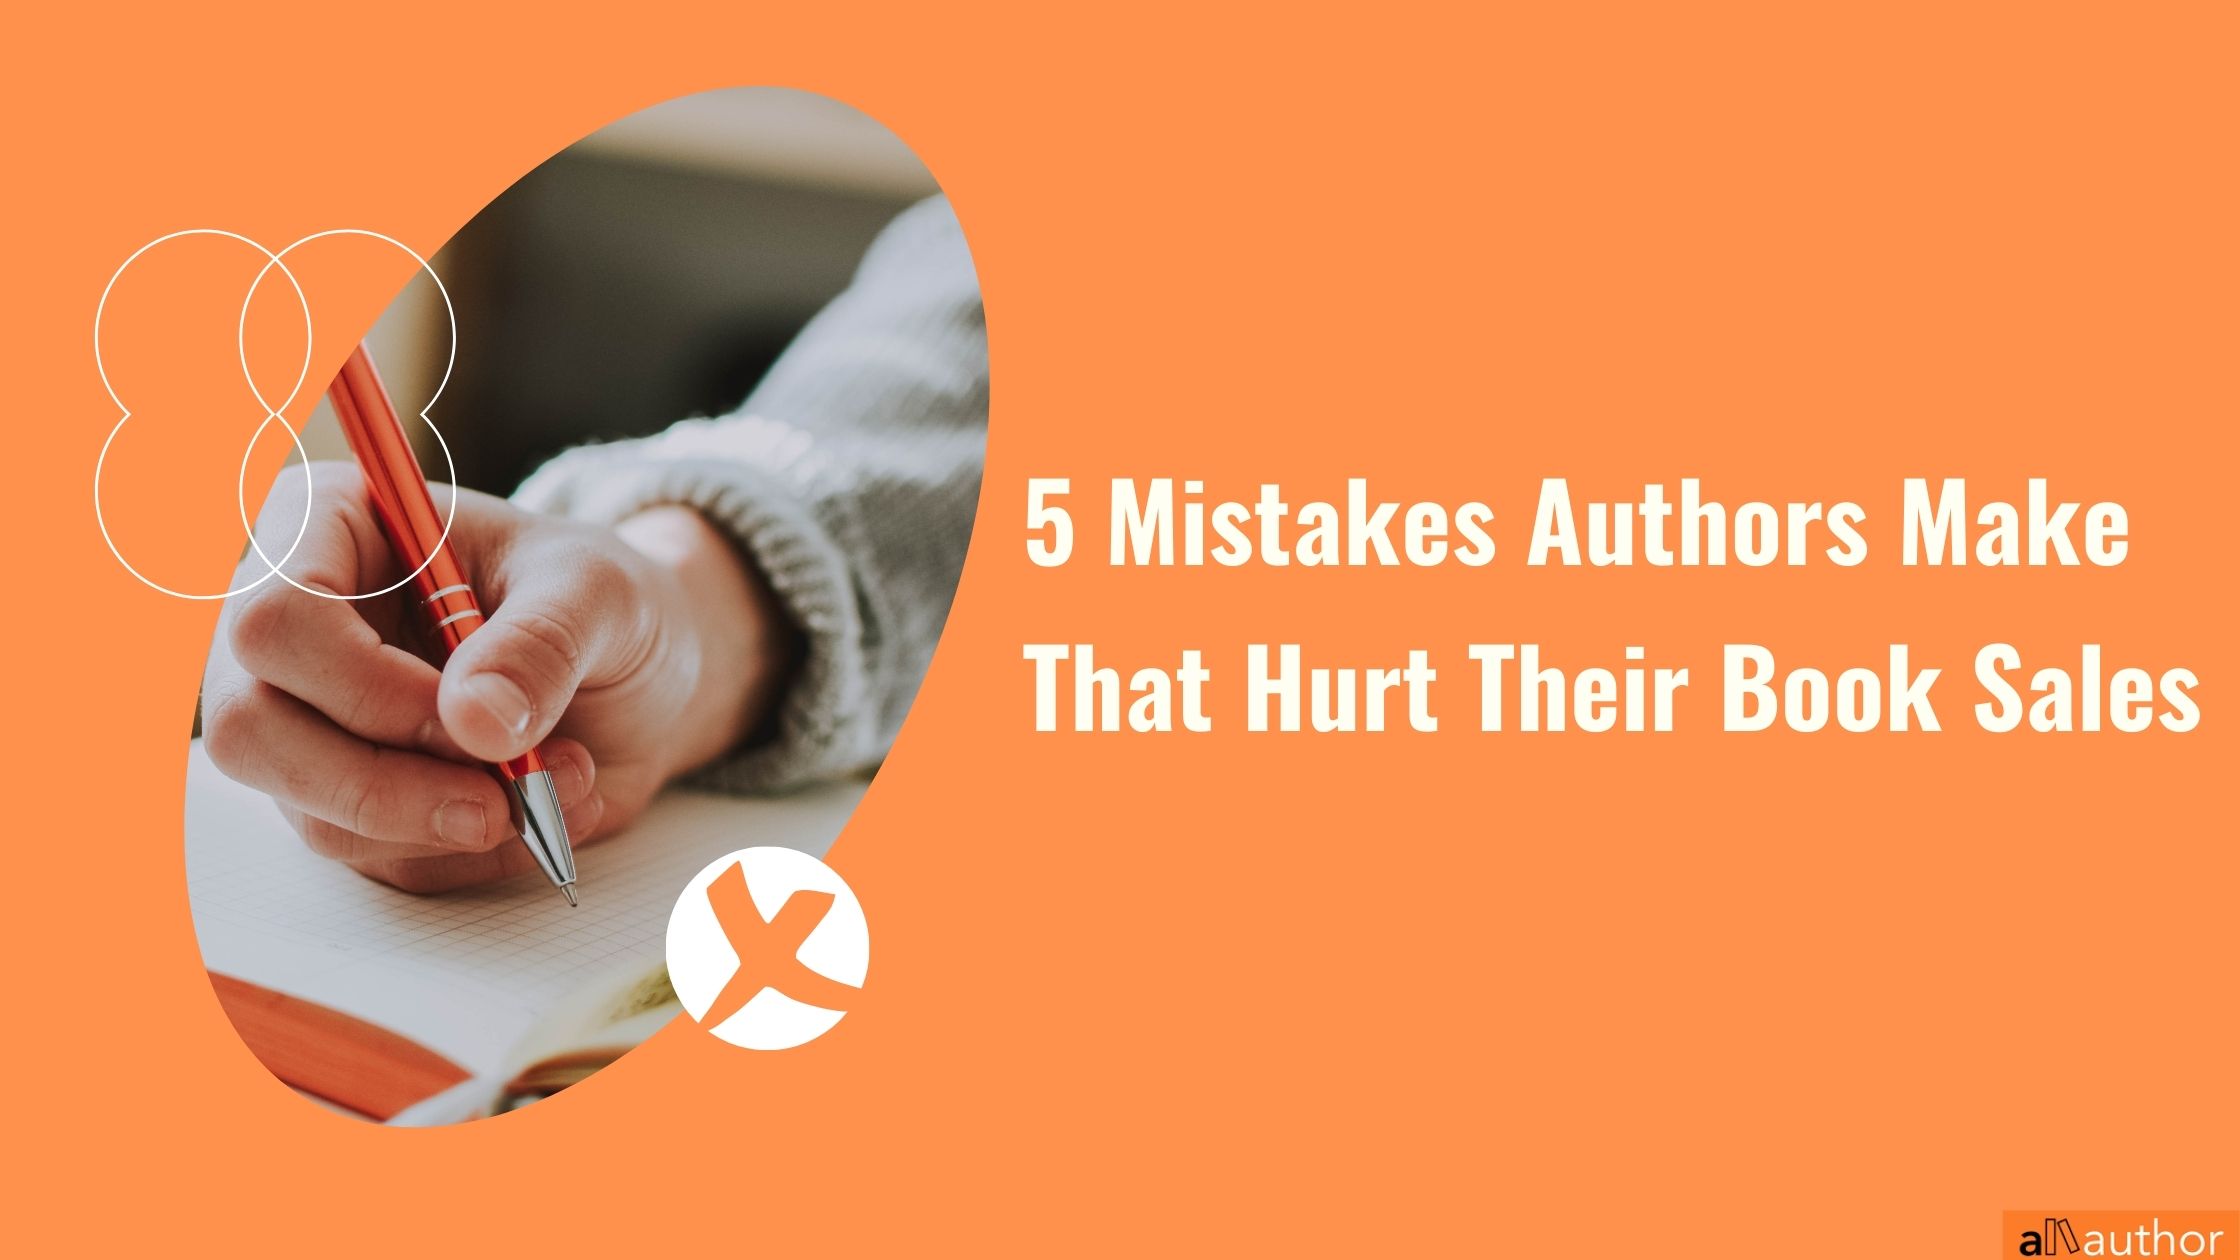 5 Mistakes Authors Make That Hurt Their Book Sales